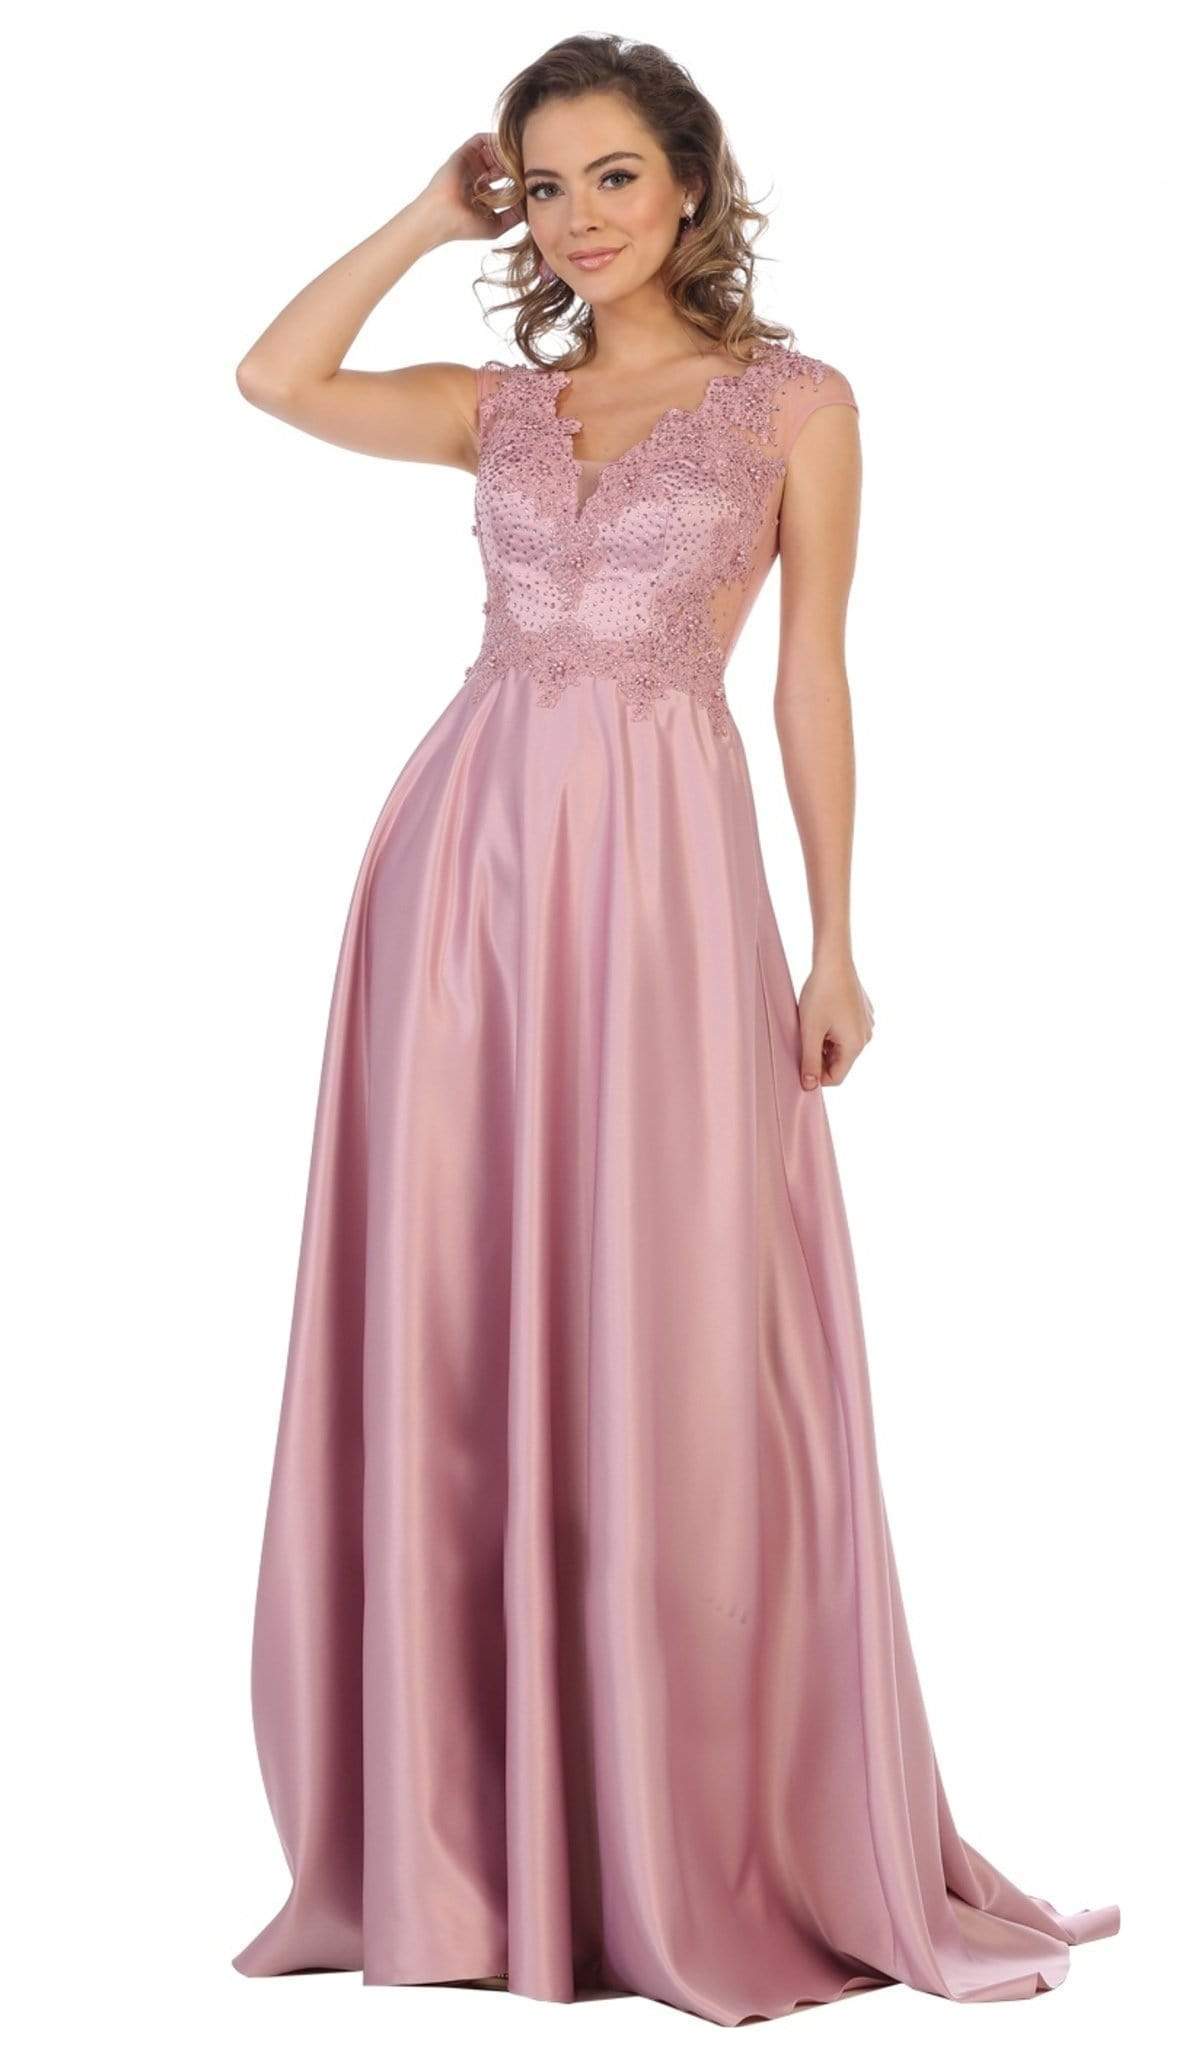 May Queen - RQ7723 Beaded Lace A-Line Evening Gown Special Occasion Dress 4 / Mauve